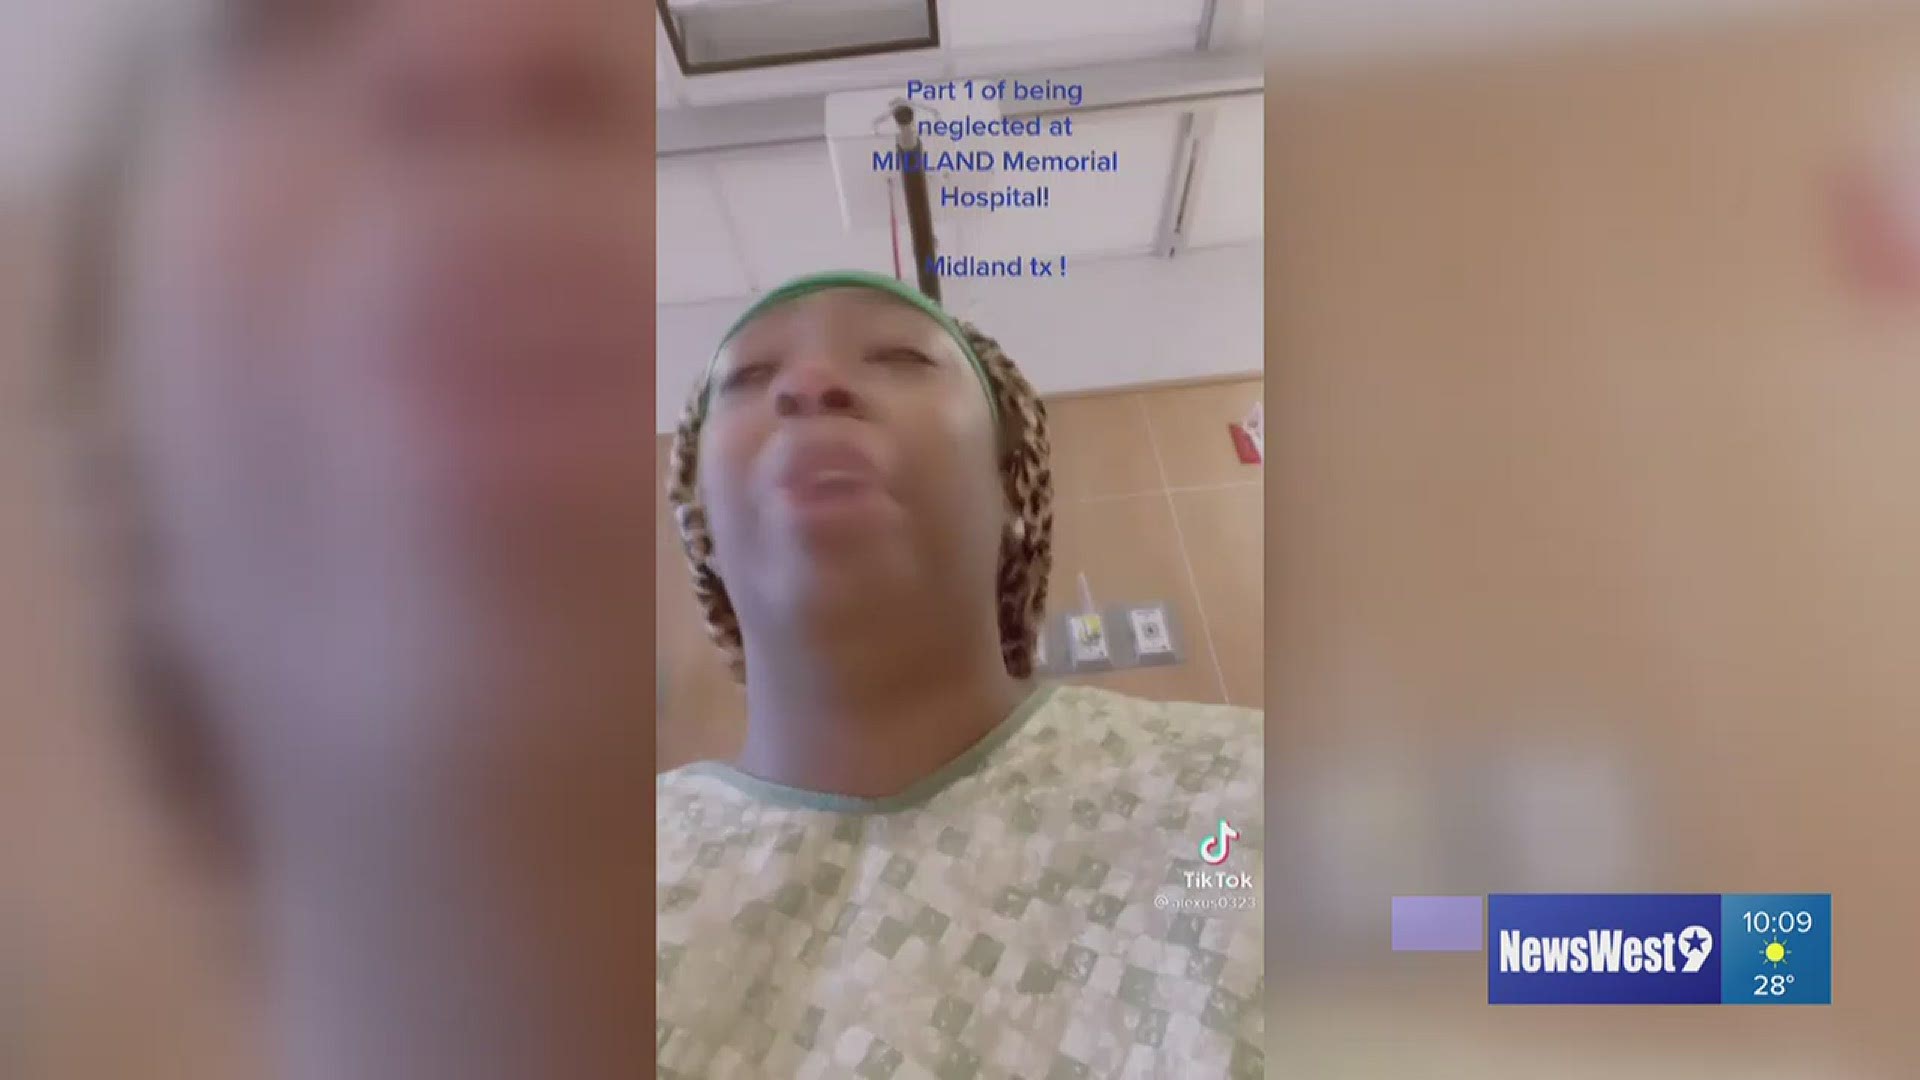 Alexus Anderson posted a series of videos to the social media platform TikTok detailing the alleged mistreatment.